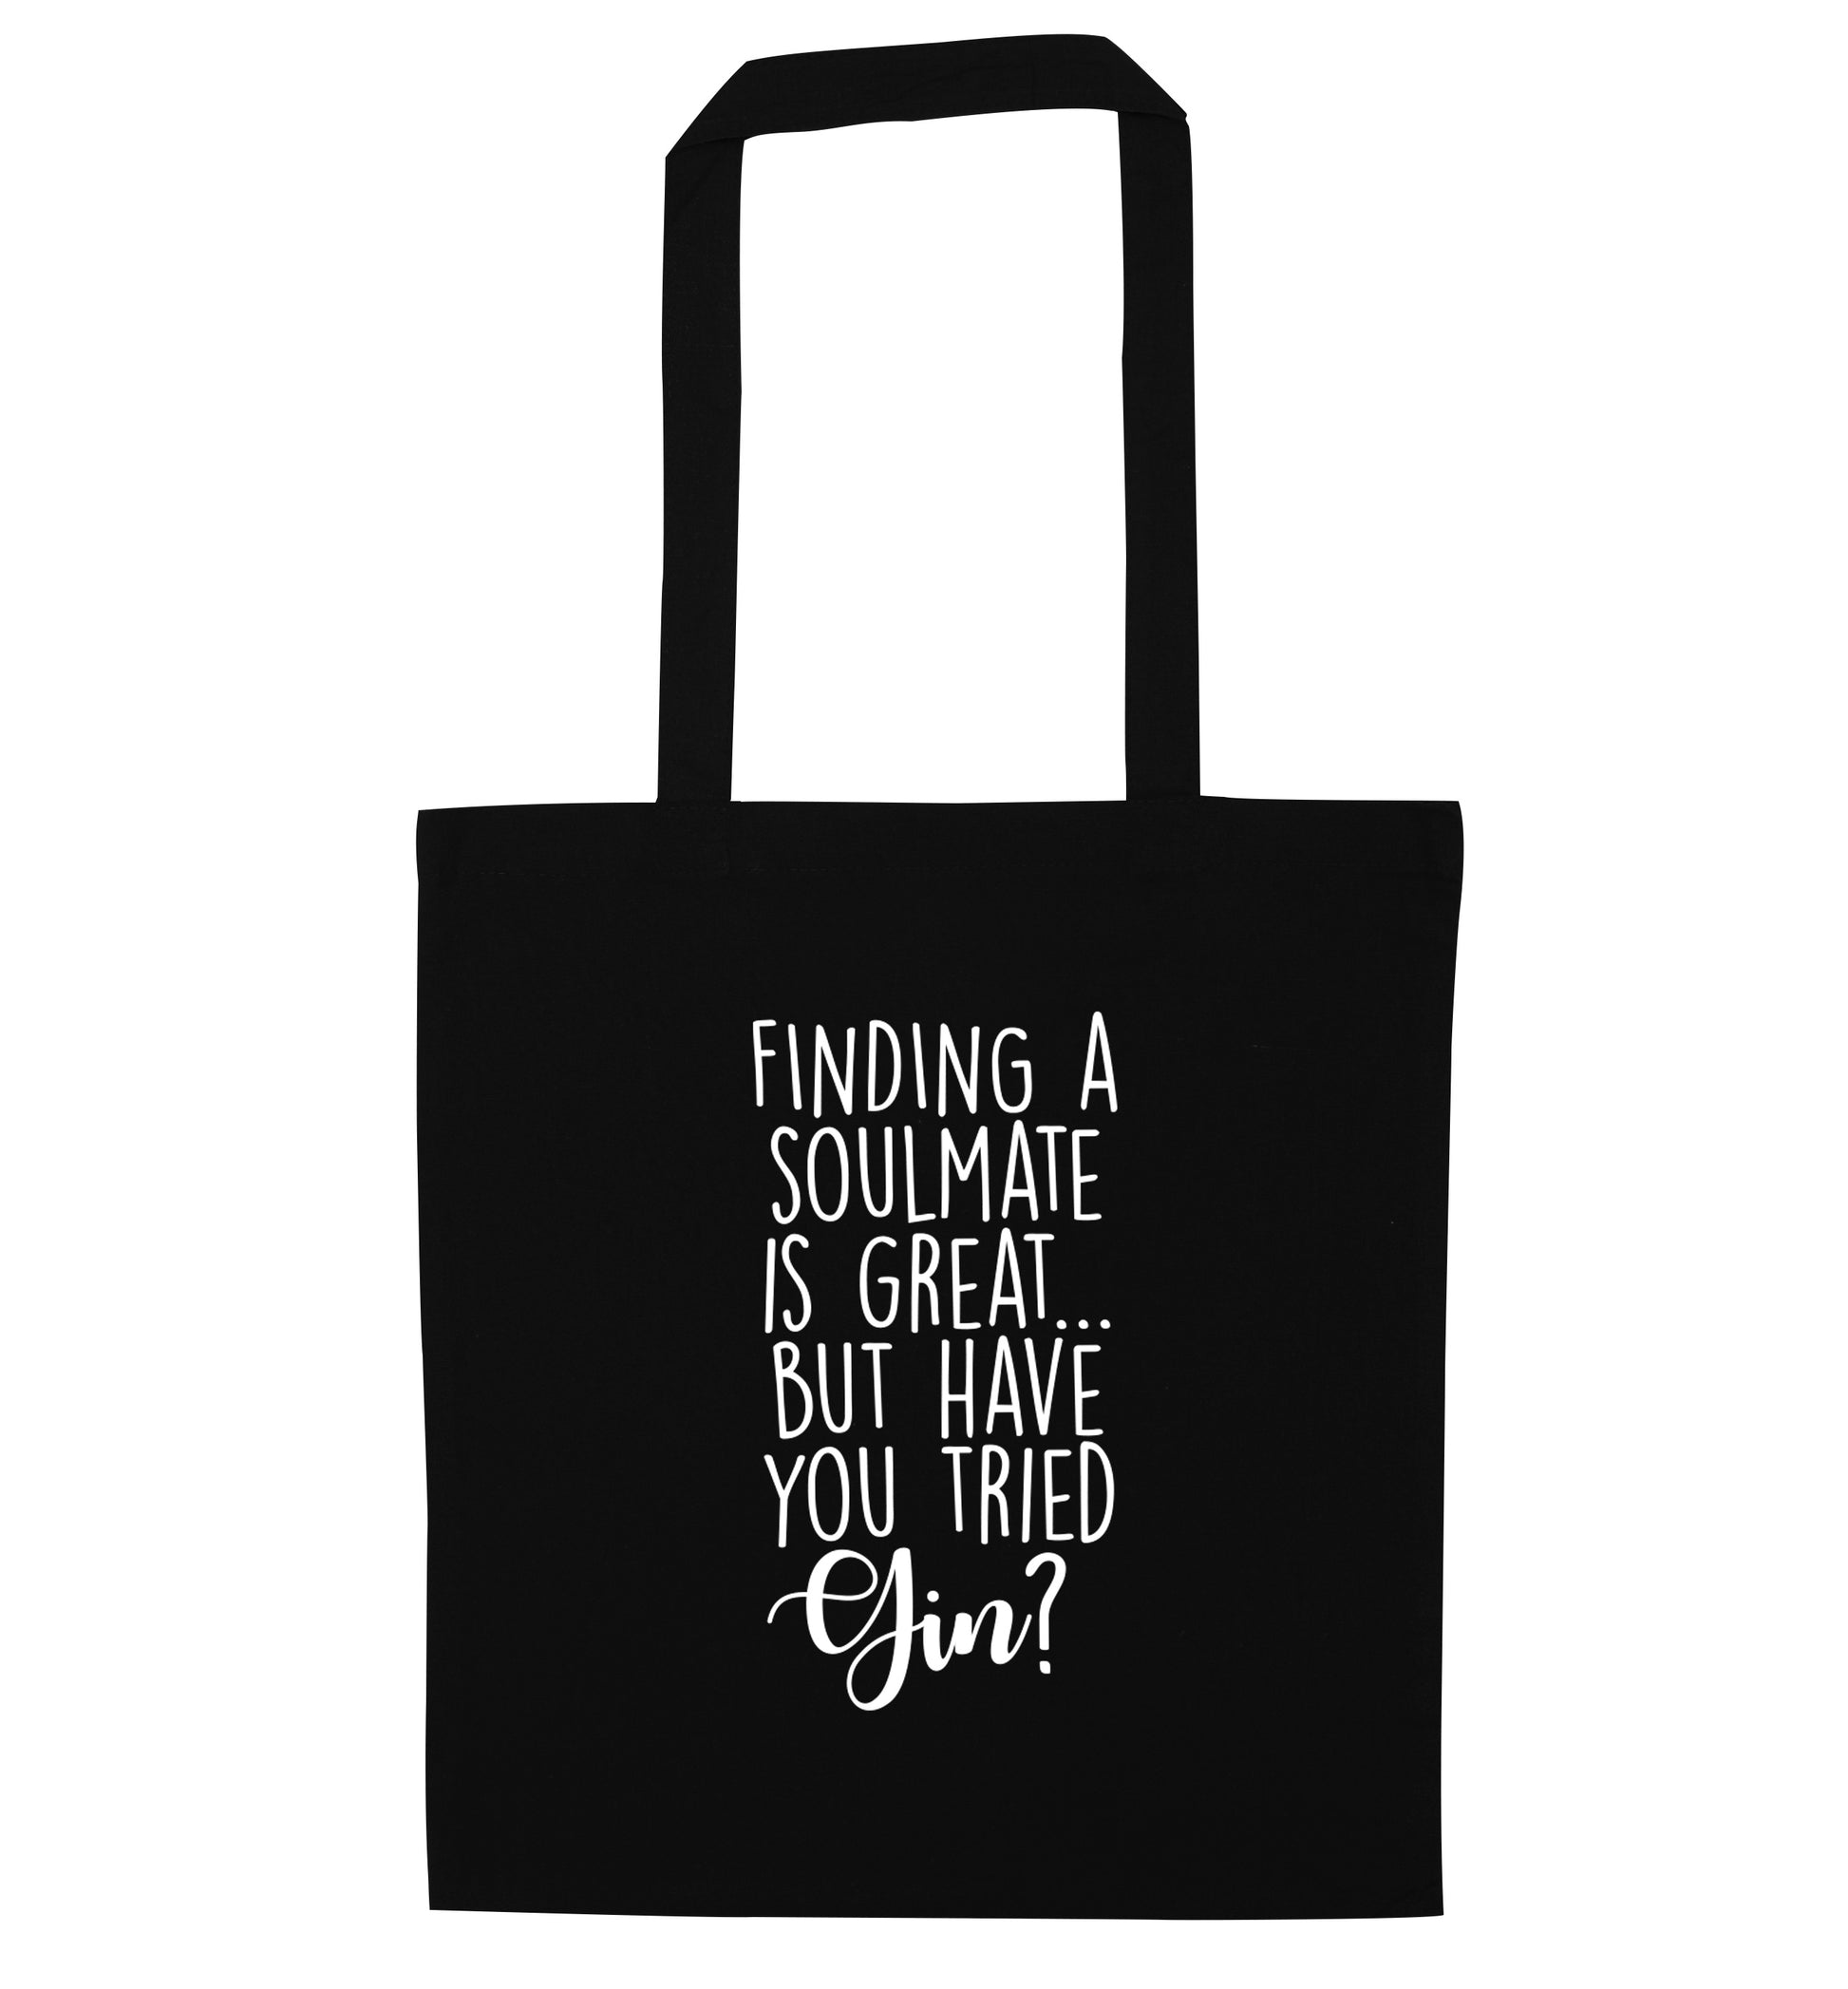 Finding a soulmate is great but have you tried gin? black tote bag